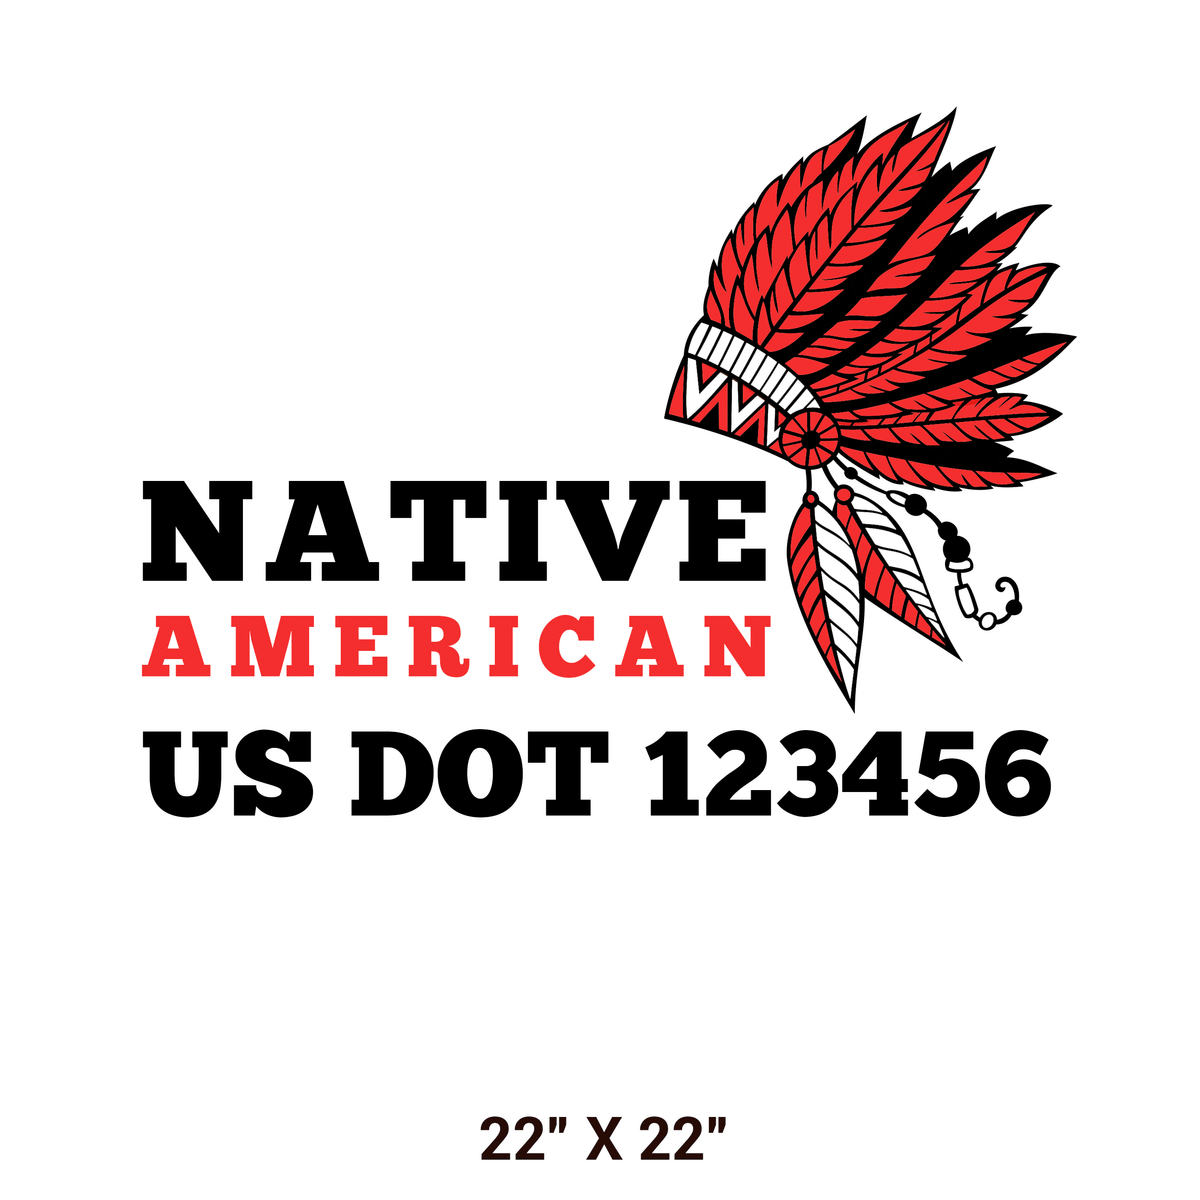 native-american-company-truck-decal-with-regulation-numbers-usdot